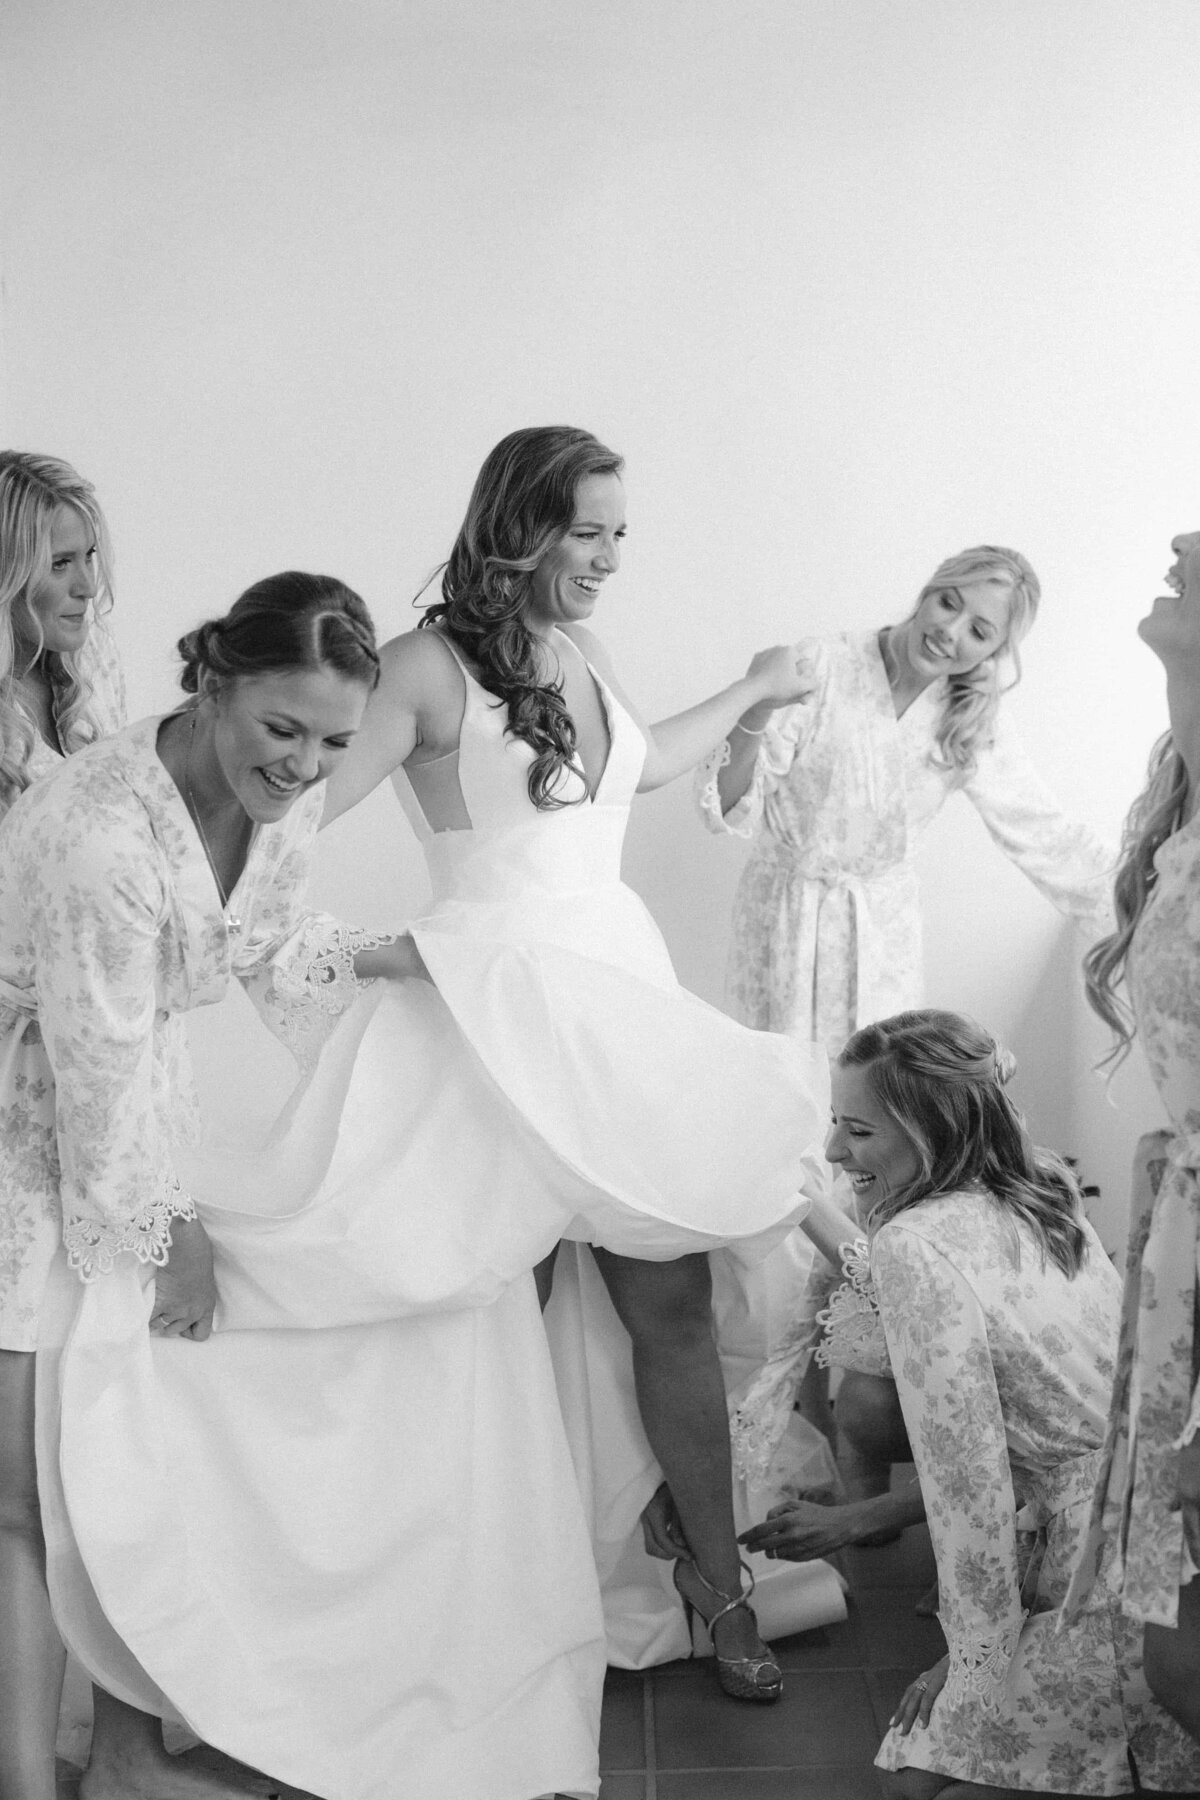 Bride getting dressed with help from the bridal party